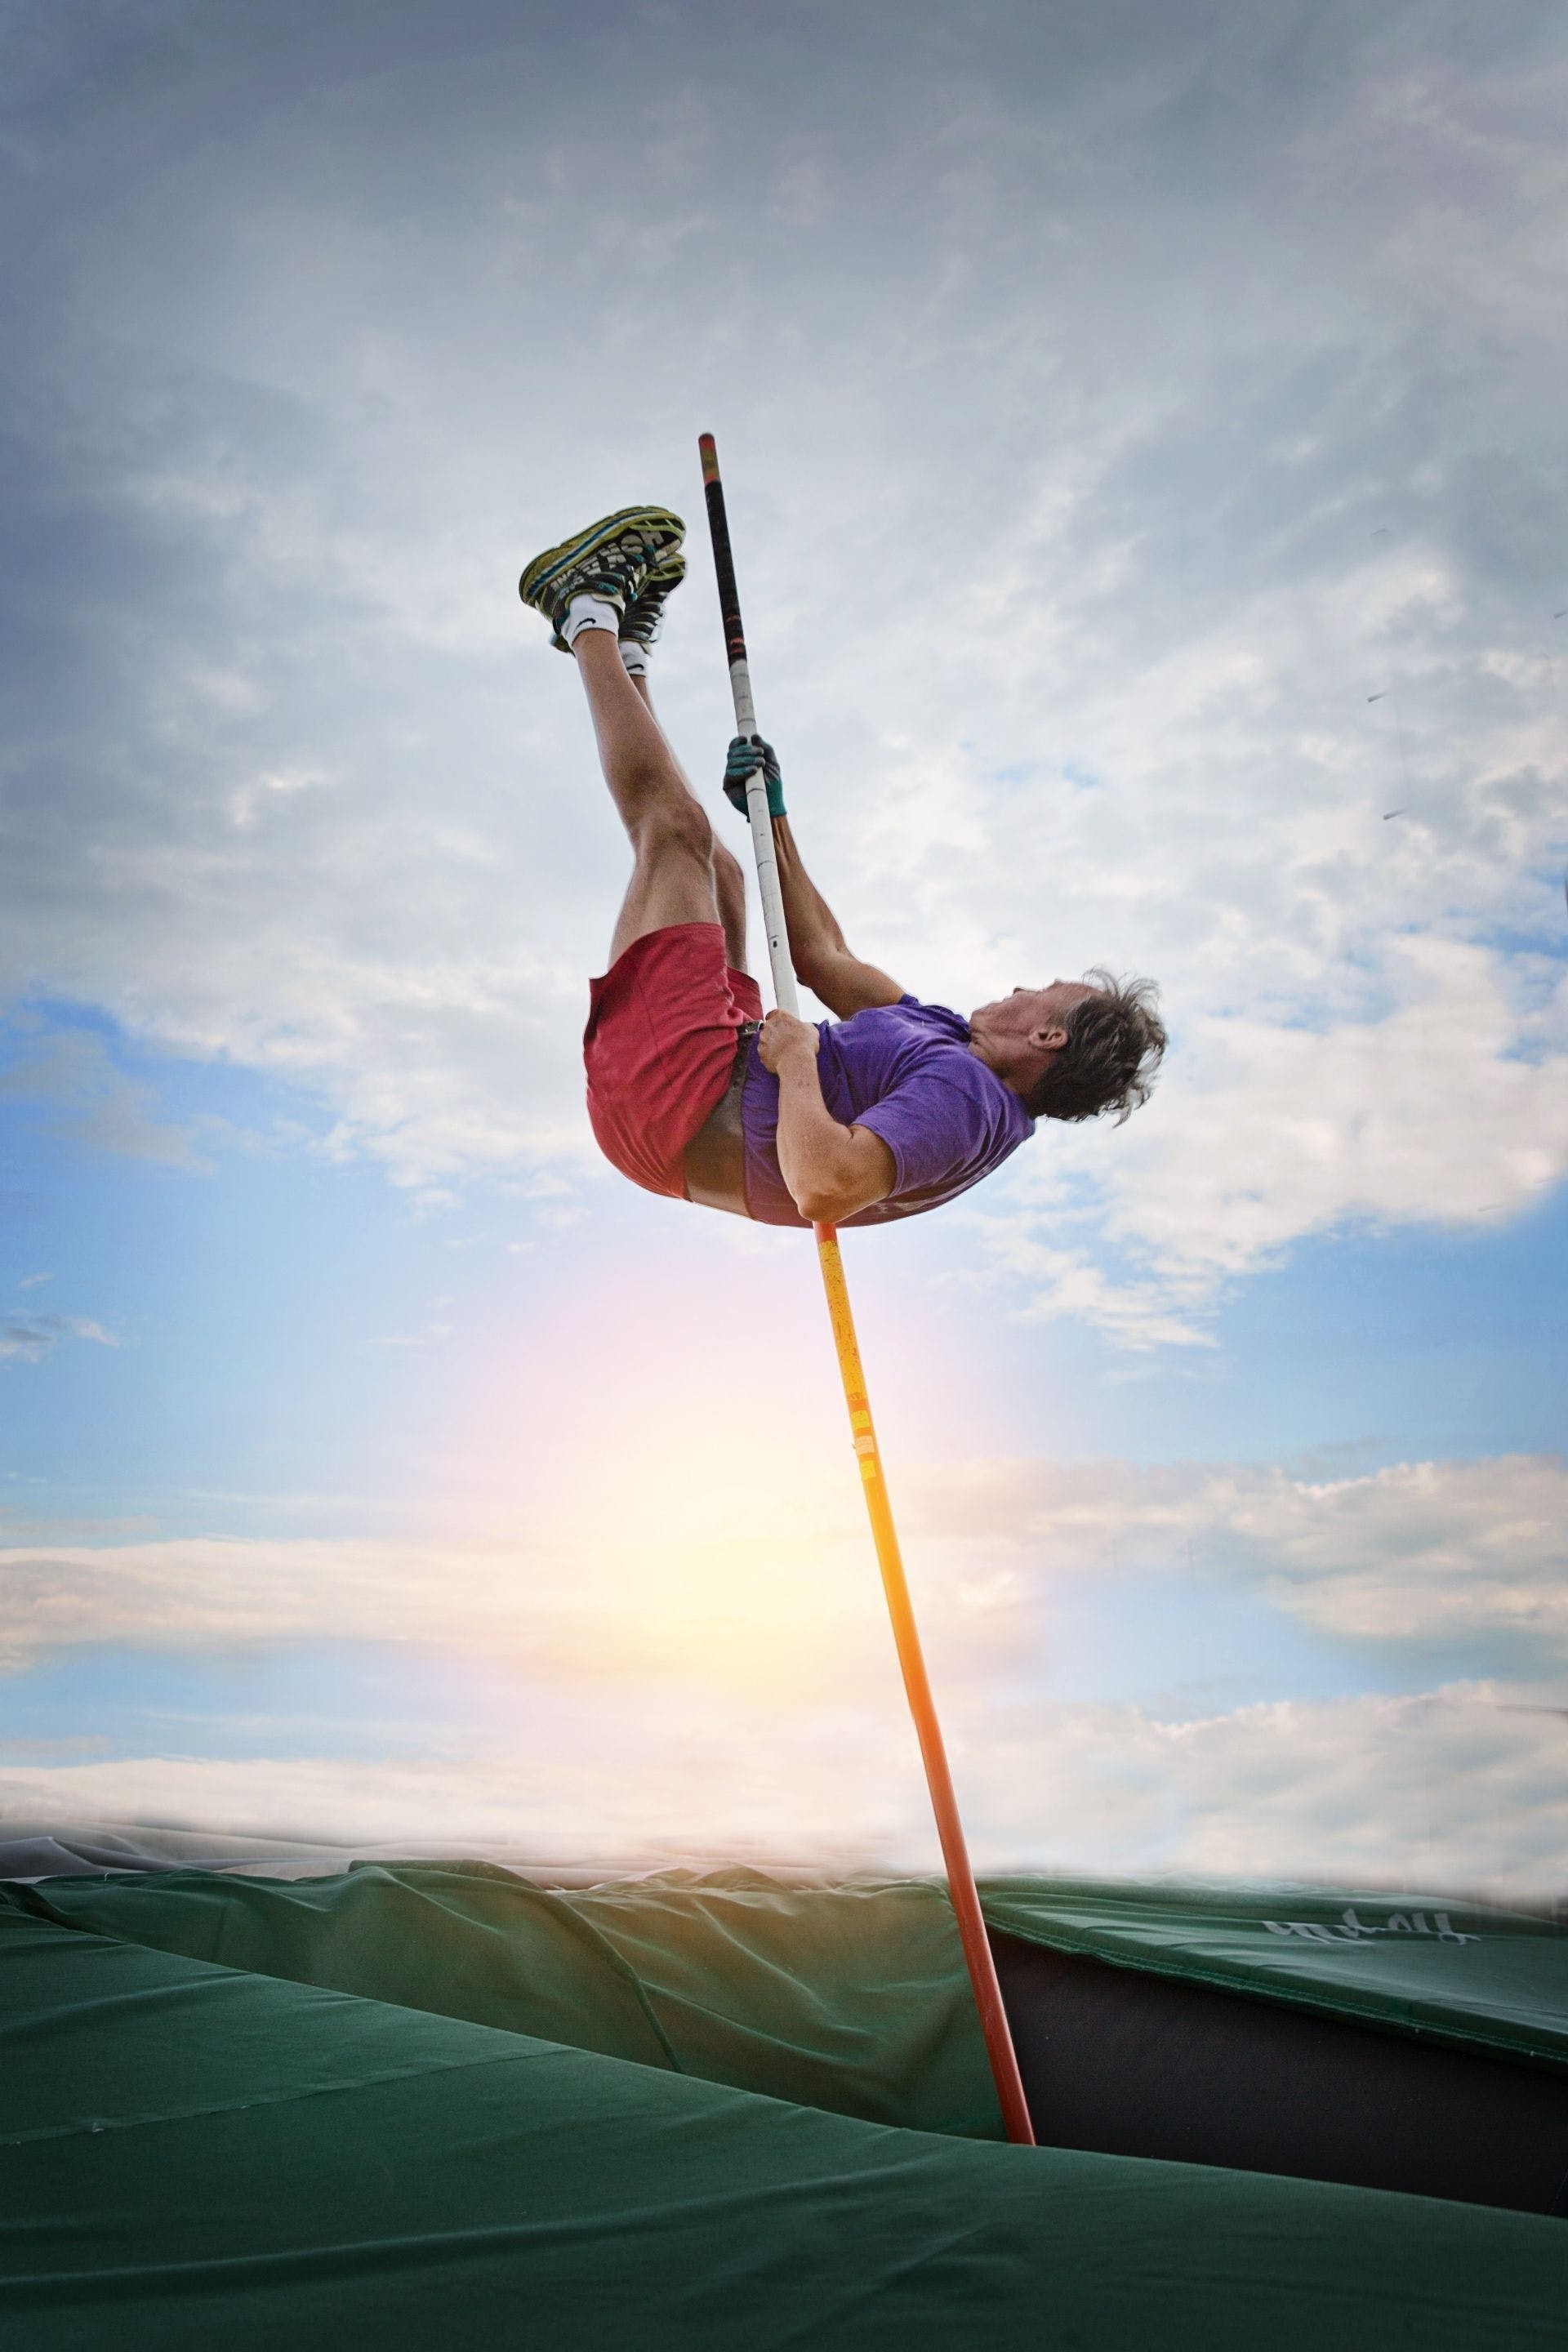 Pole Vaulting: A competition in which athletes jump as high as possible using long and flexible pole. 1920x2880 HD Wallpaper.